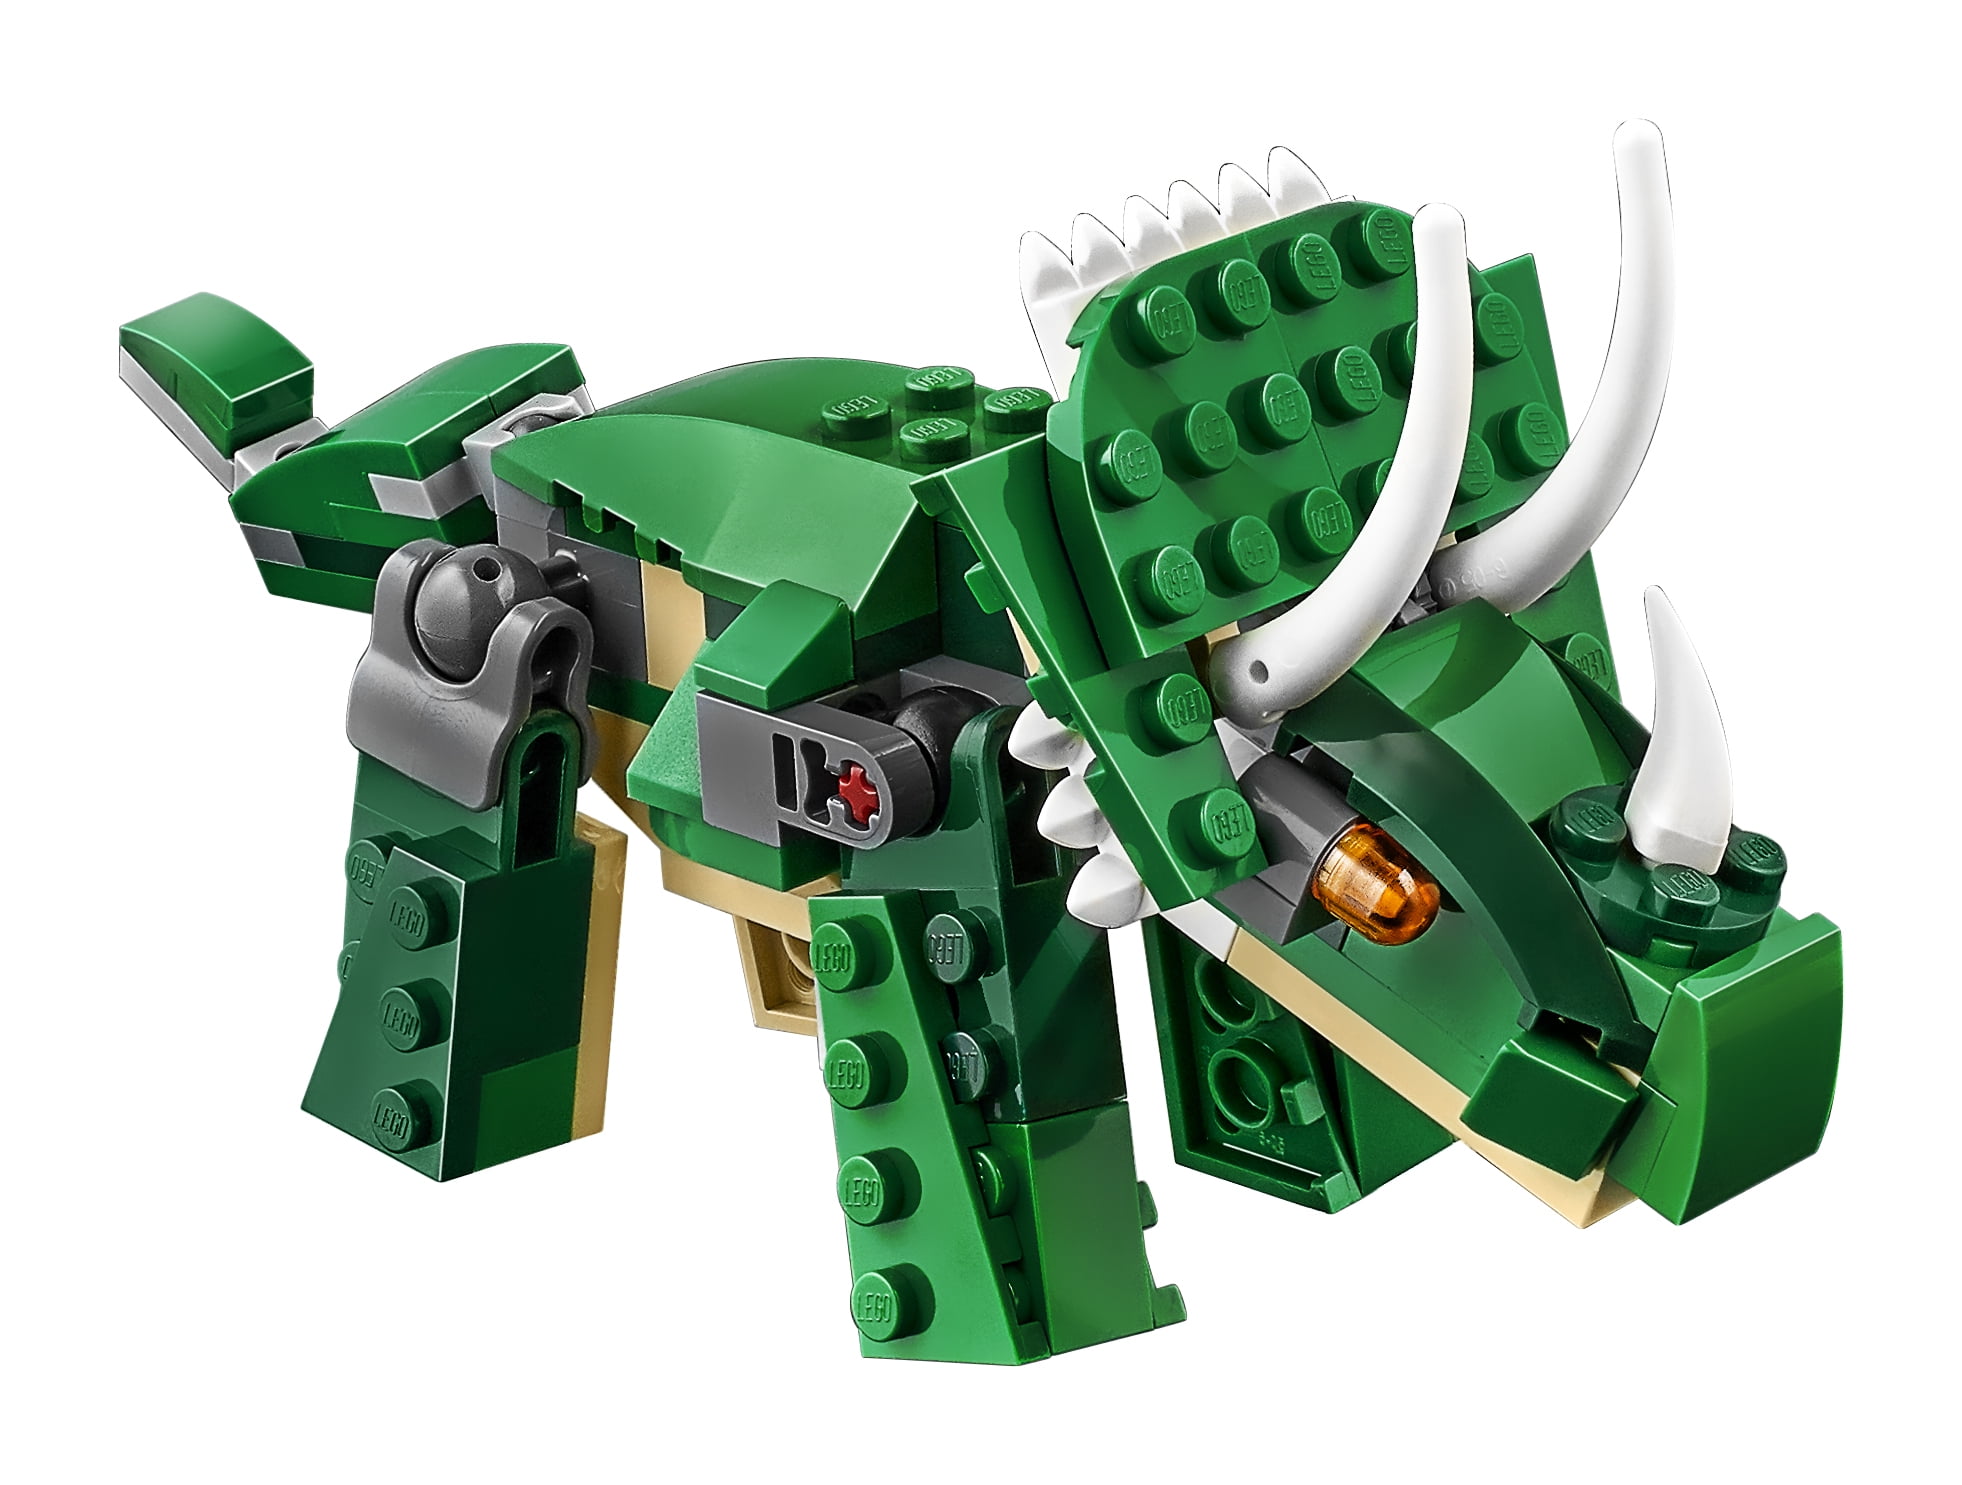 LEGO Creator Mighty Dinosaur Toy 31058, 3 in Model, T. rex, Triceratops and Pterodactyl Dinosaur Figures, Gifts for - 12 Year Old Boys & Girls - Walmart.com